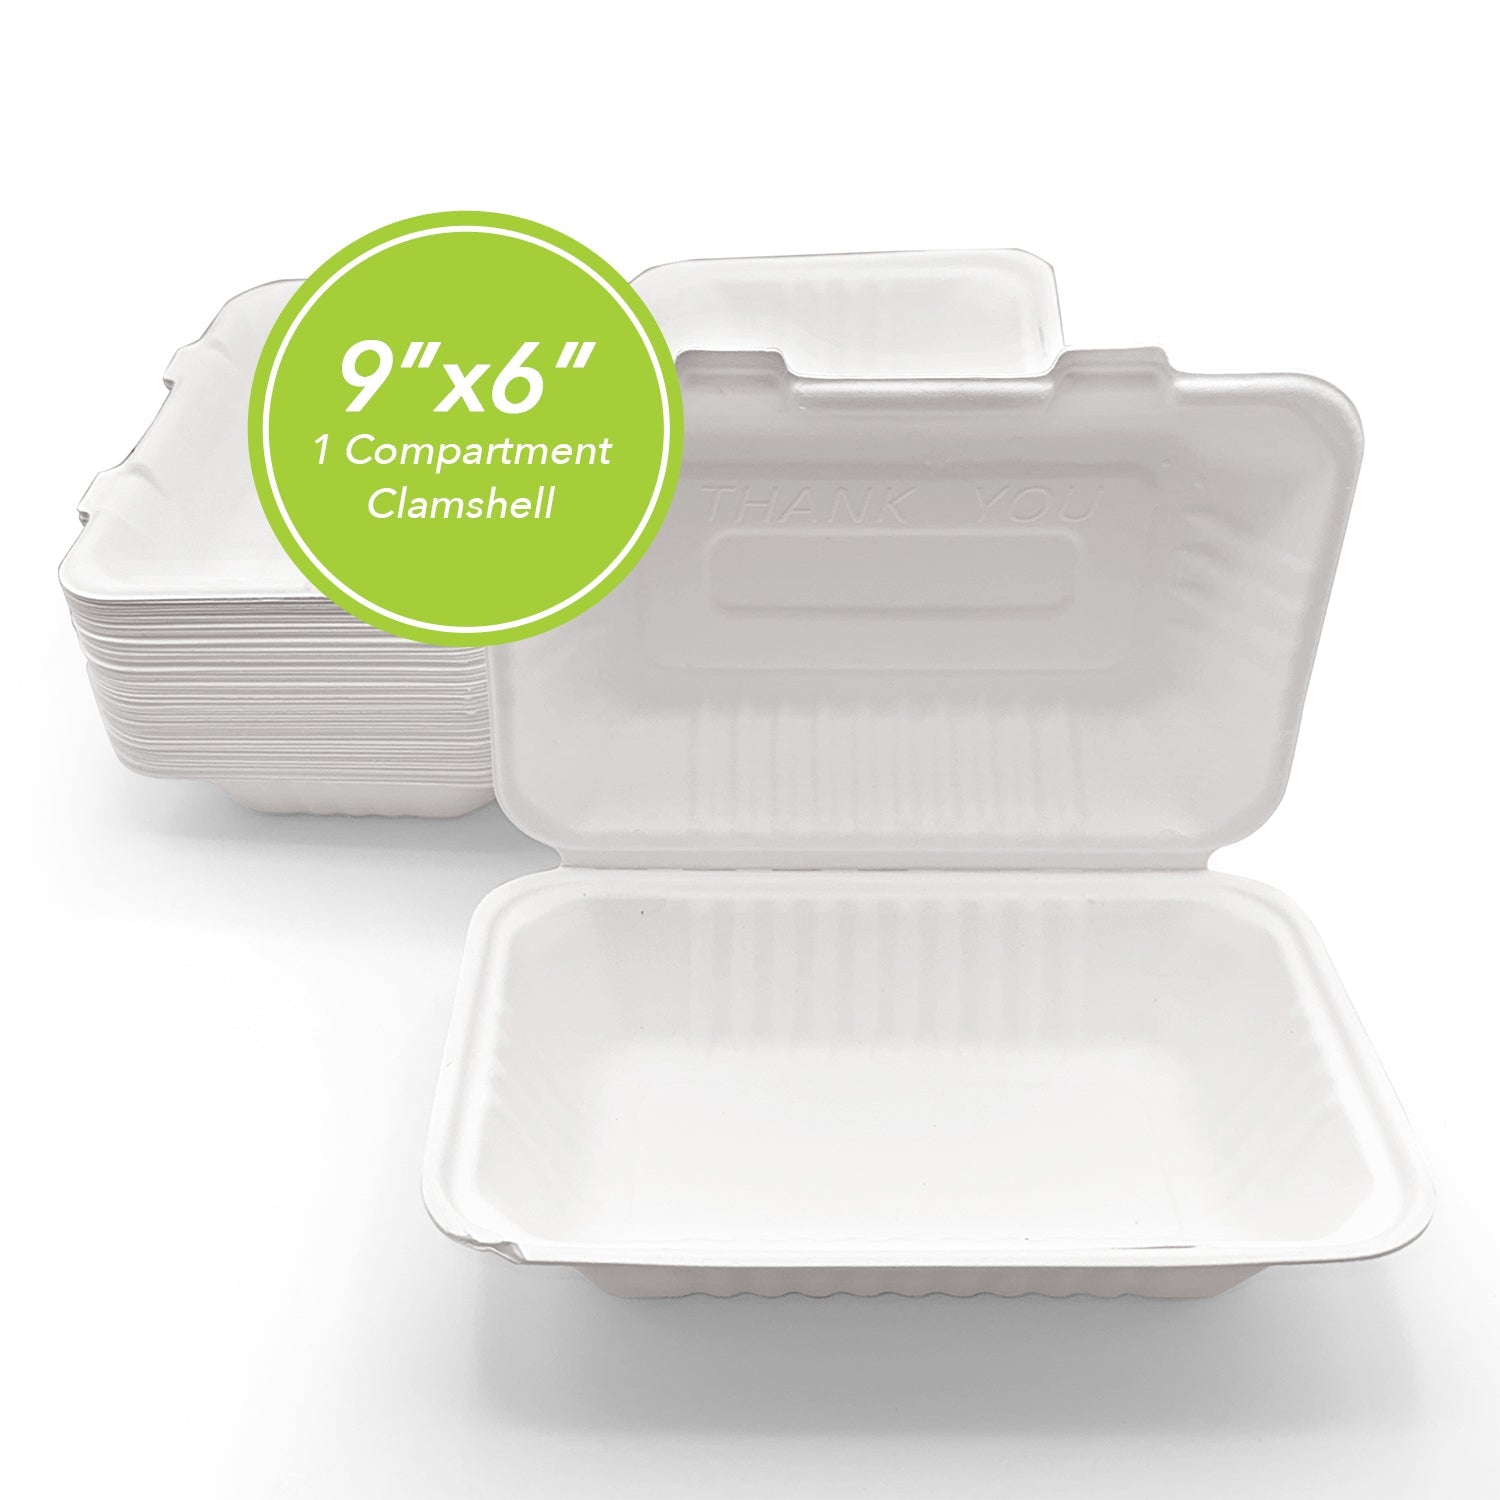 THREE LEAF 9" x 6" 1 COMPARTMENT BAGASSE CLAMSHELL, 200 Ct. (4 PACKS OF 50)